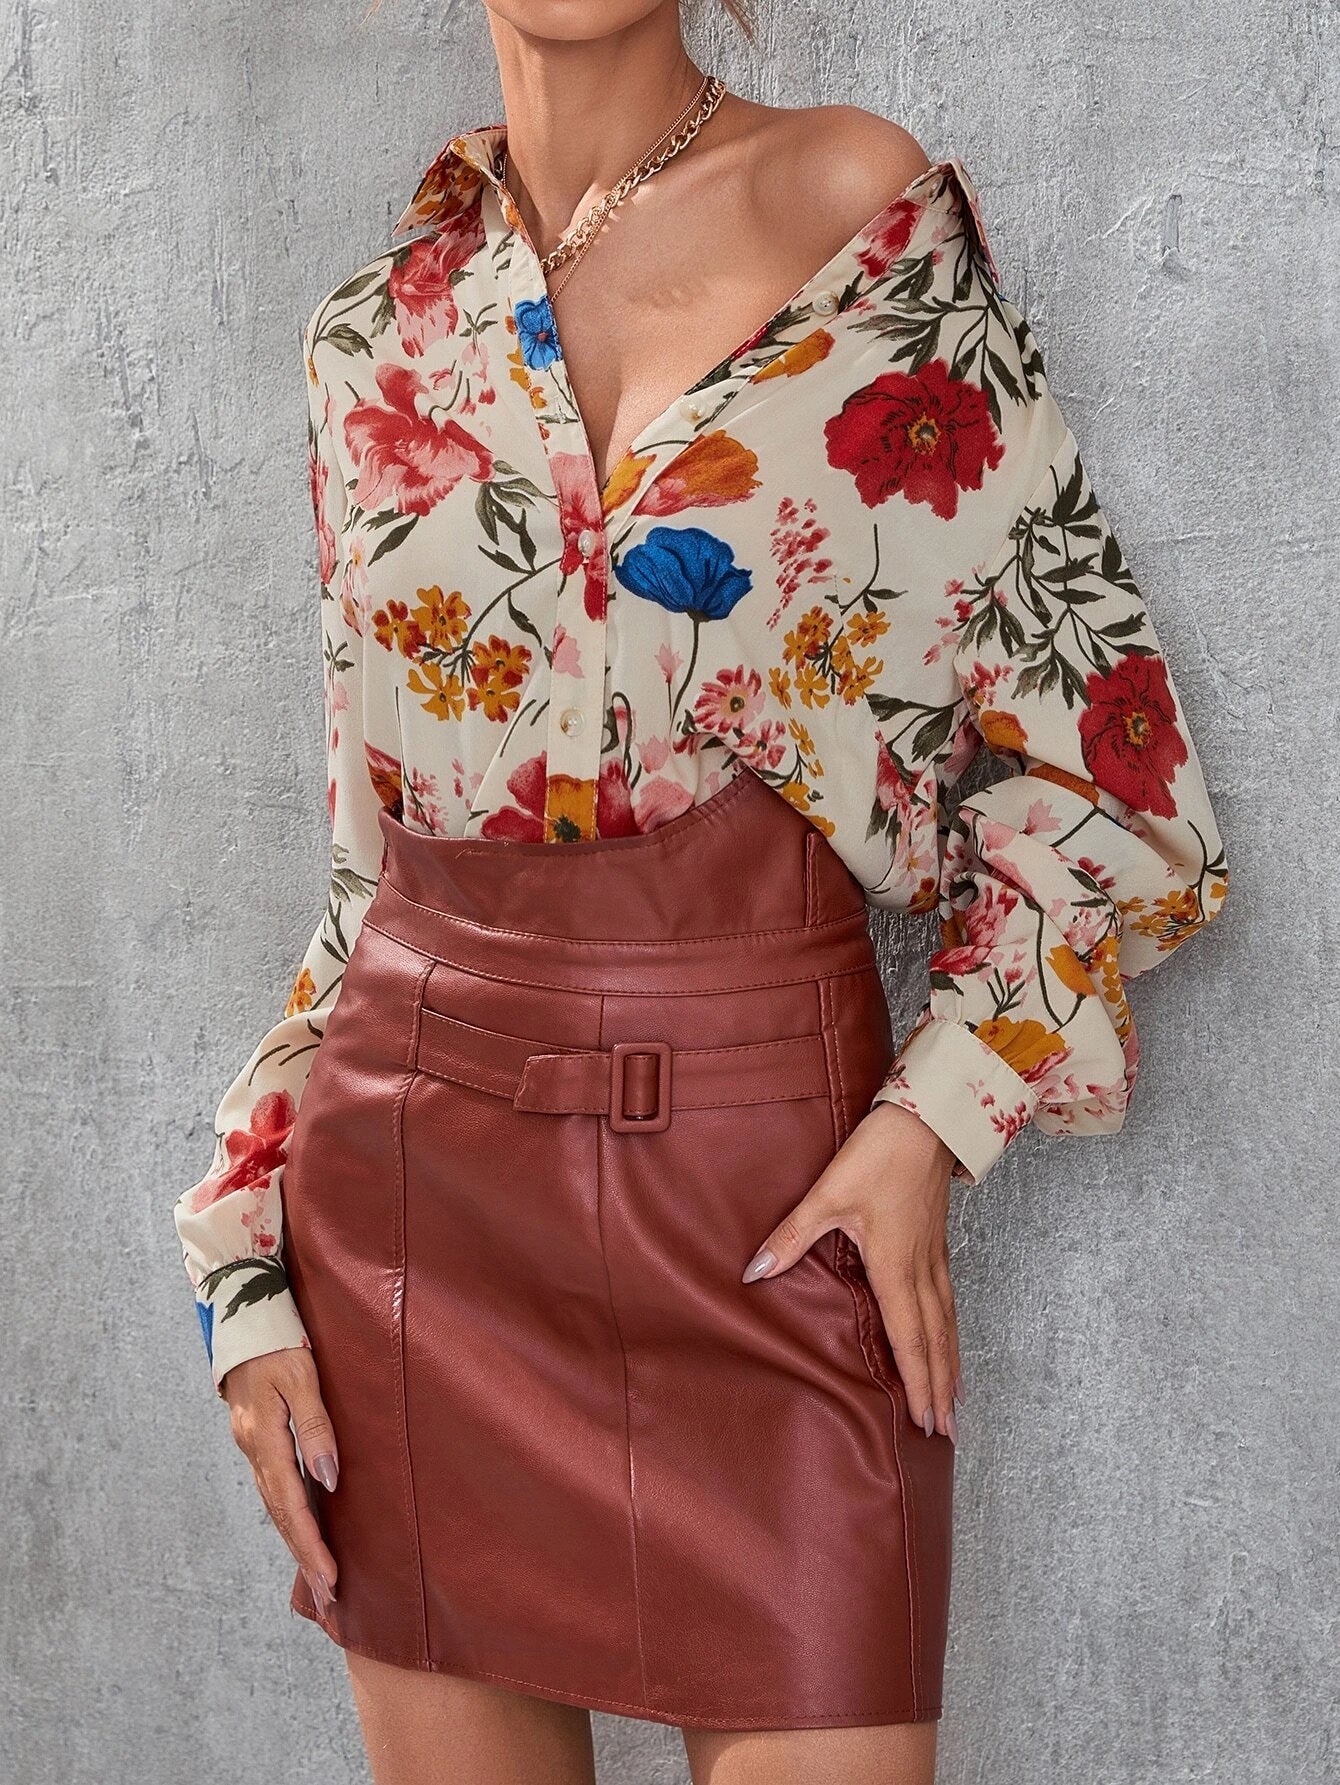 Buy Shein Floral Print Button Front Shirt in Pakistan